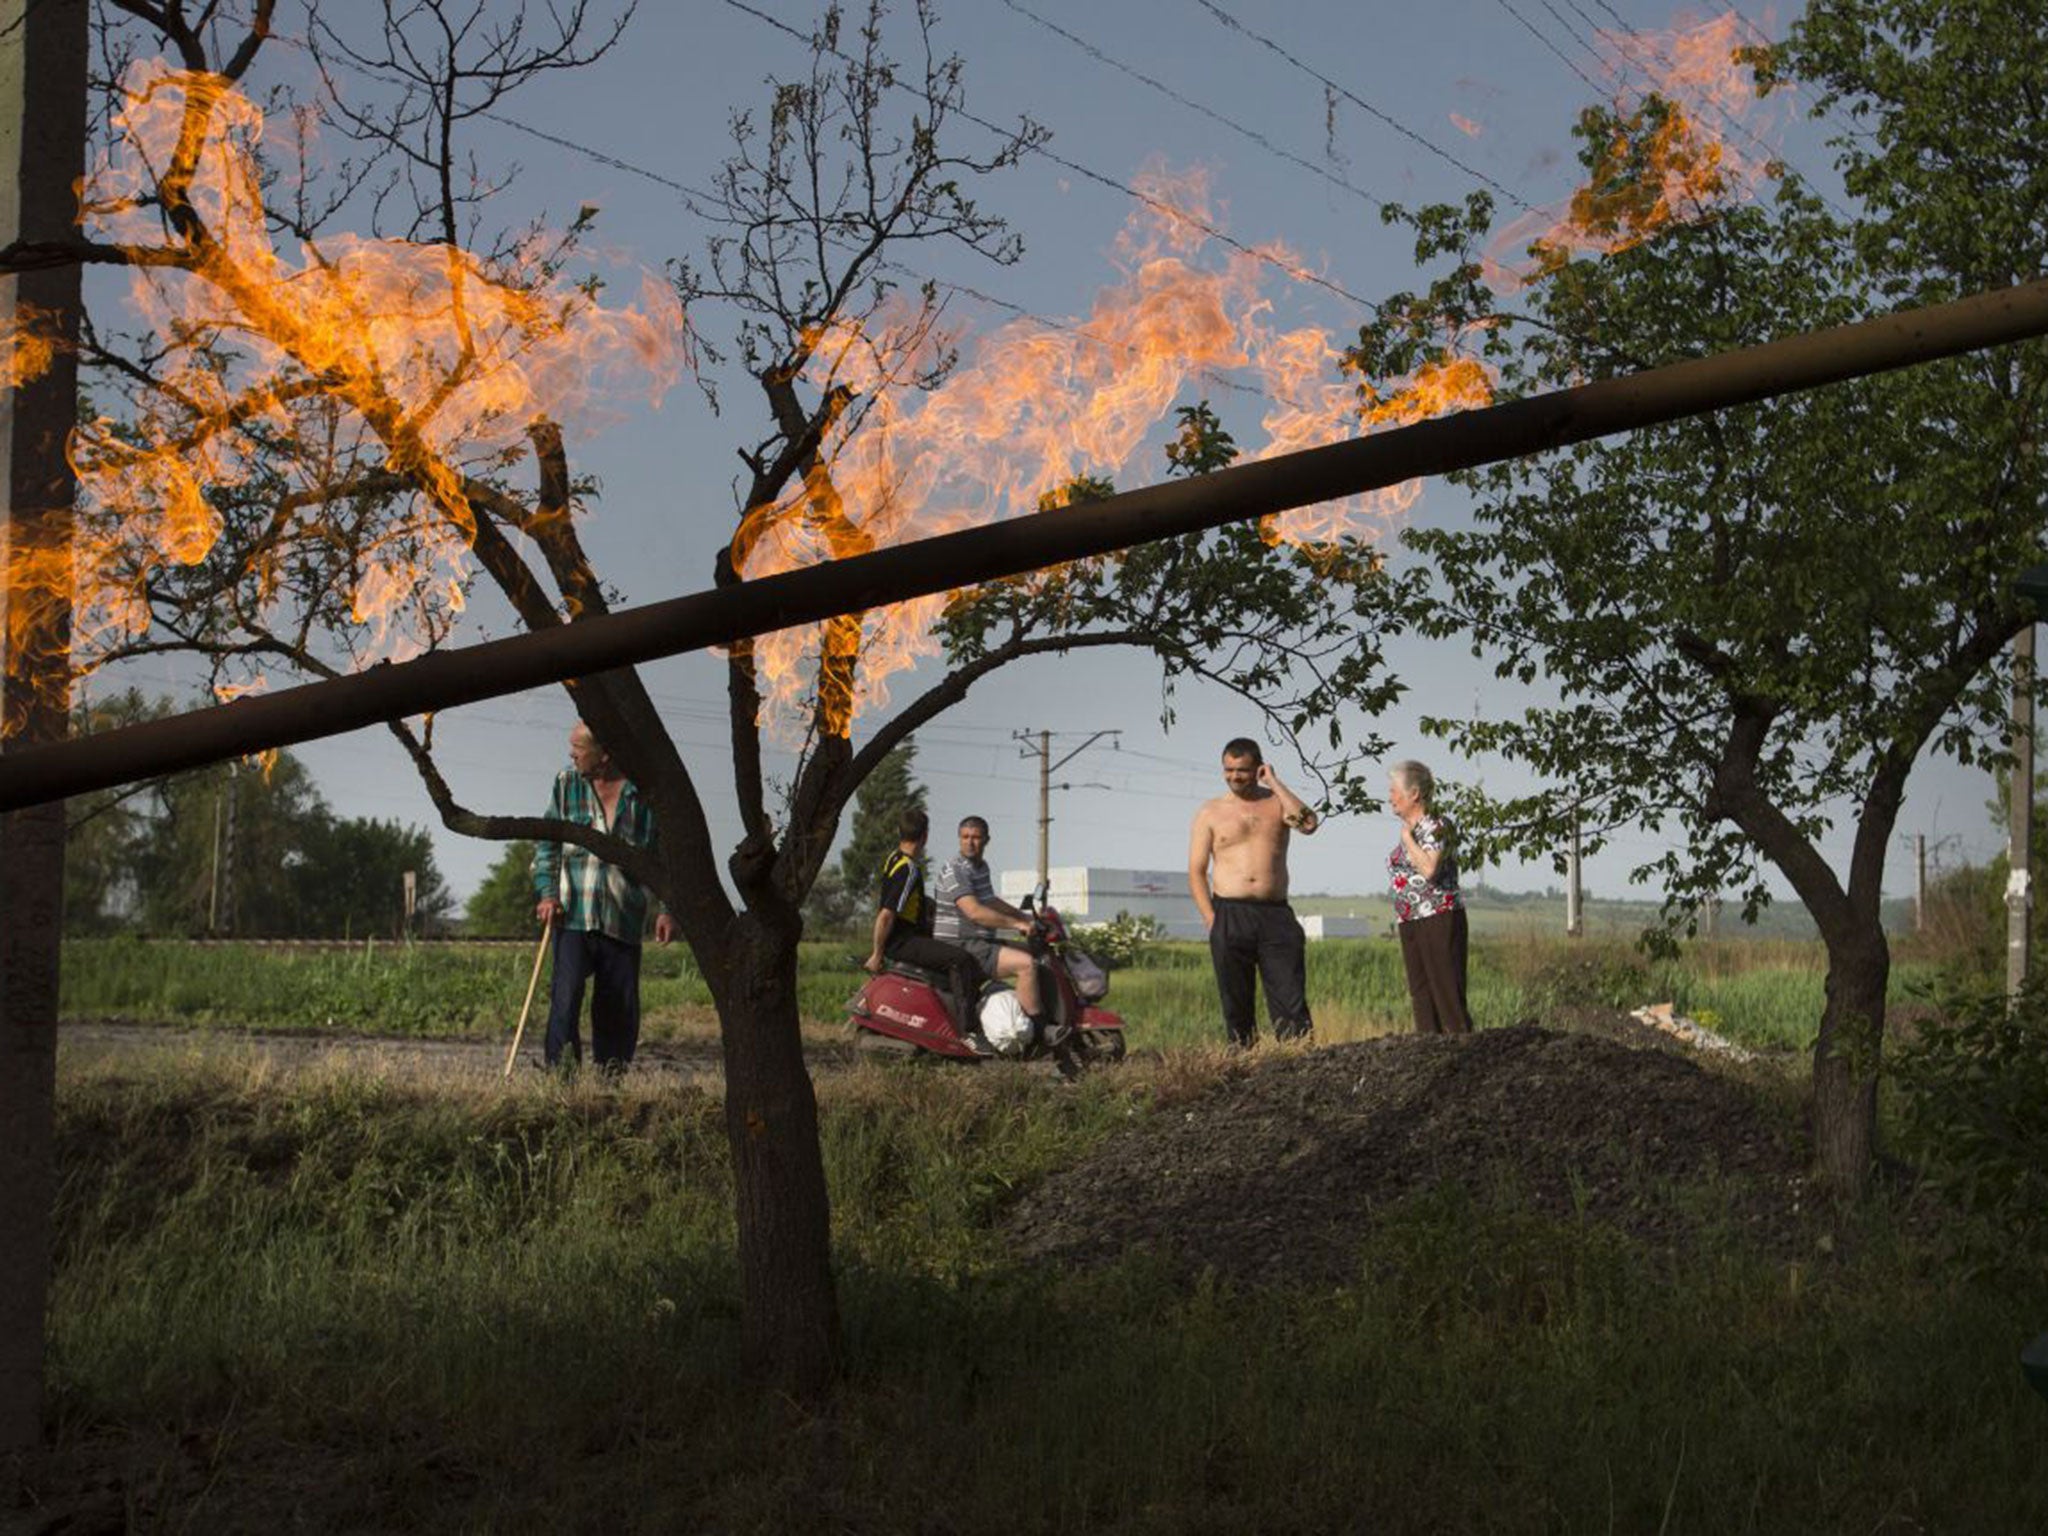 Residents watch flames from a gas pipe damaged by a mortar bomb during fighting in Slovyansk